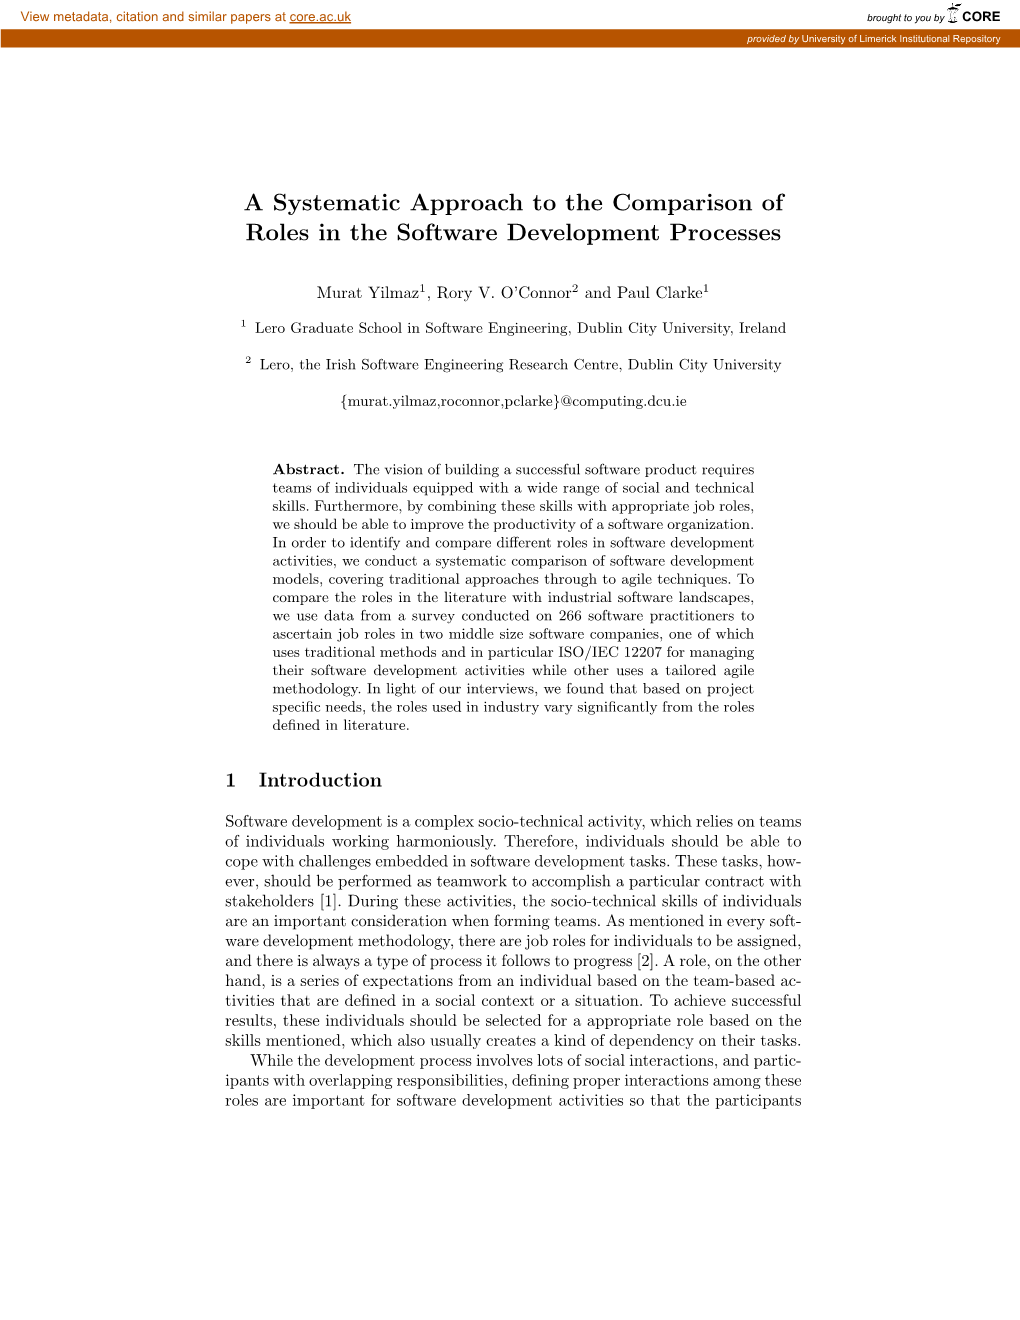 A Systematic Approach to the Comparison of Roles in the Software Development Processes